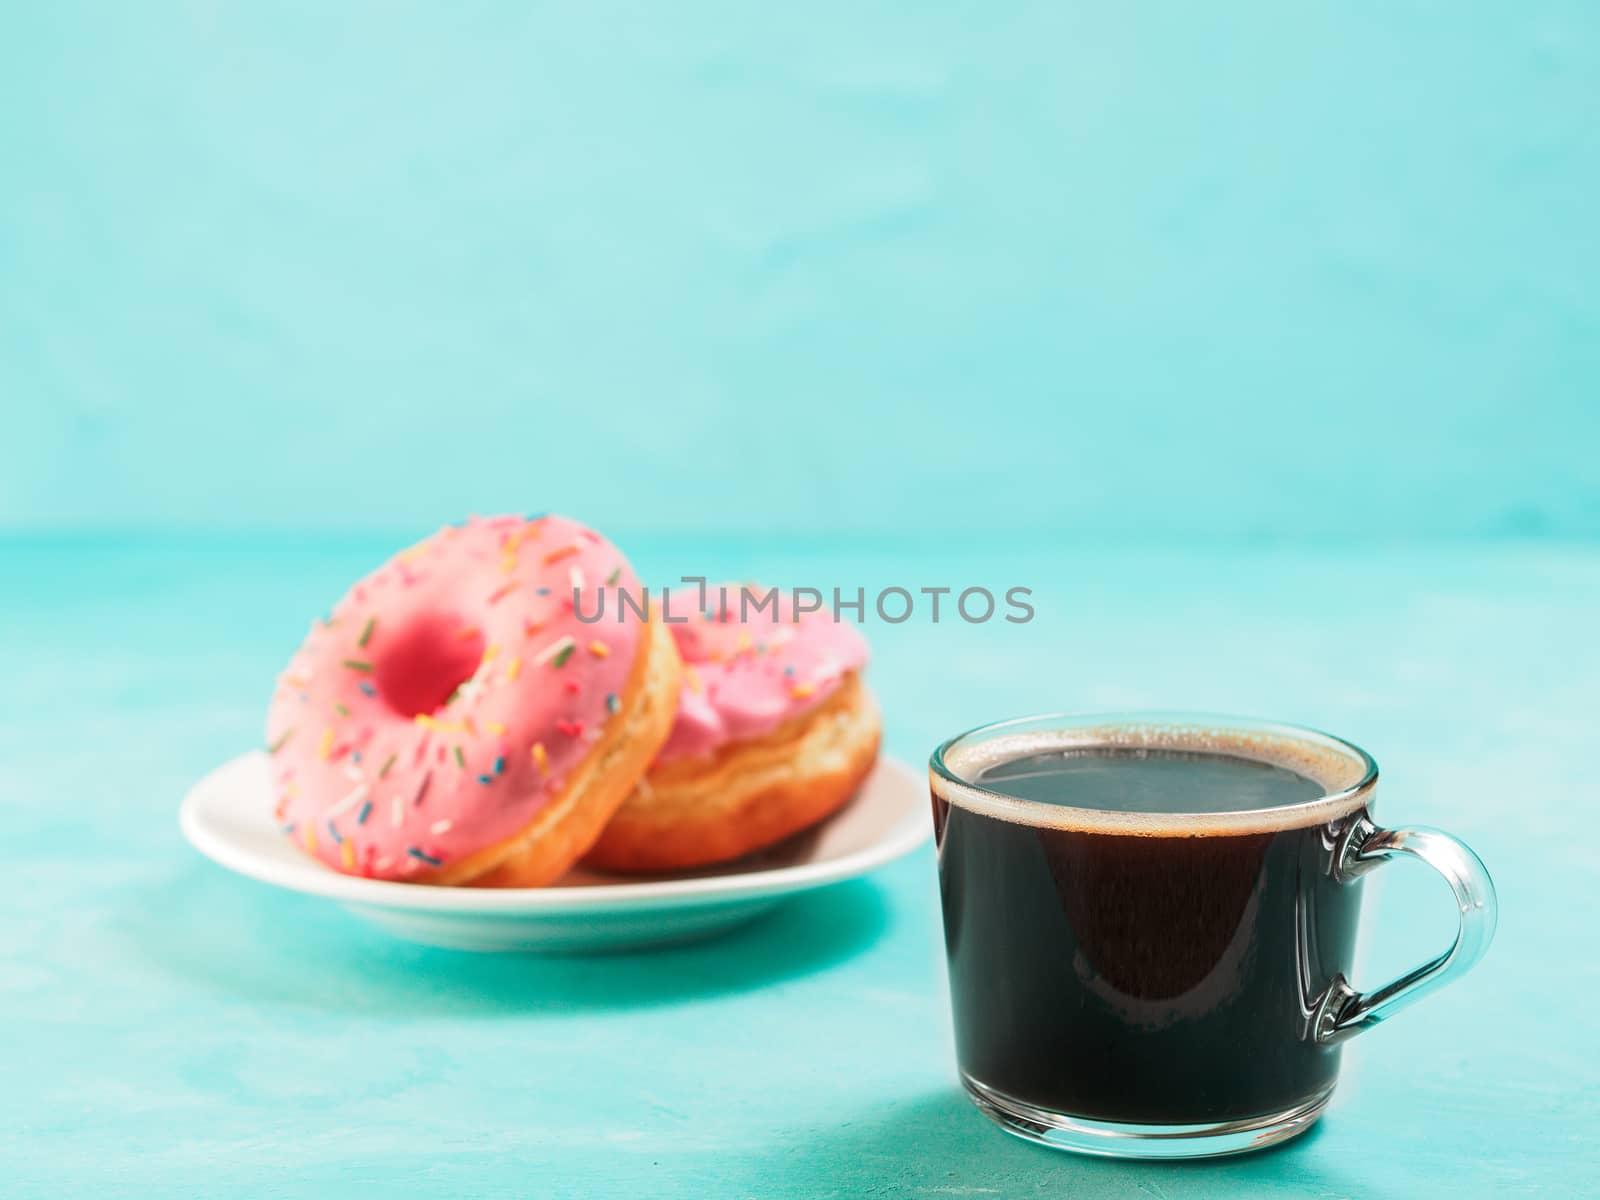 Two pink donuts and coffee on blue concrete background with copy space. Colorful donuts in plate and coffee cup with copyspace. Glazed doughnuts with sprinkles